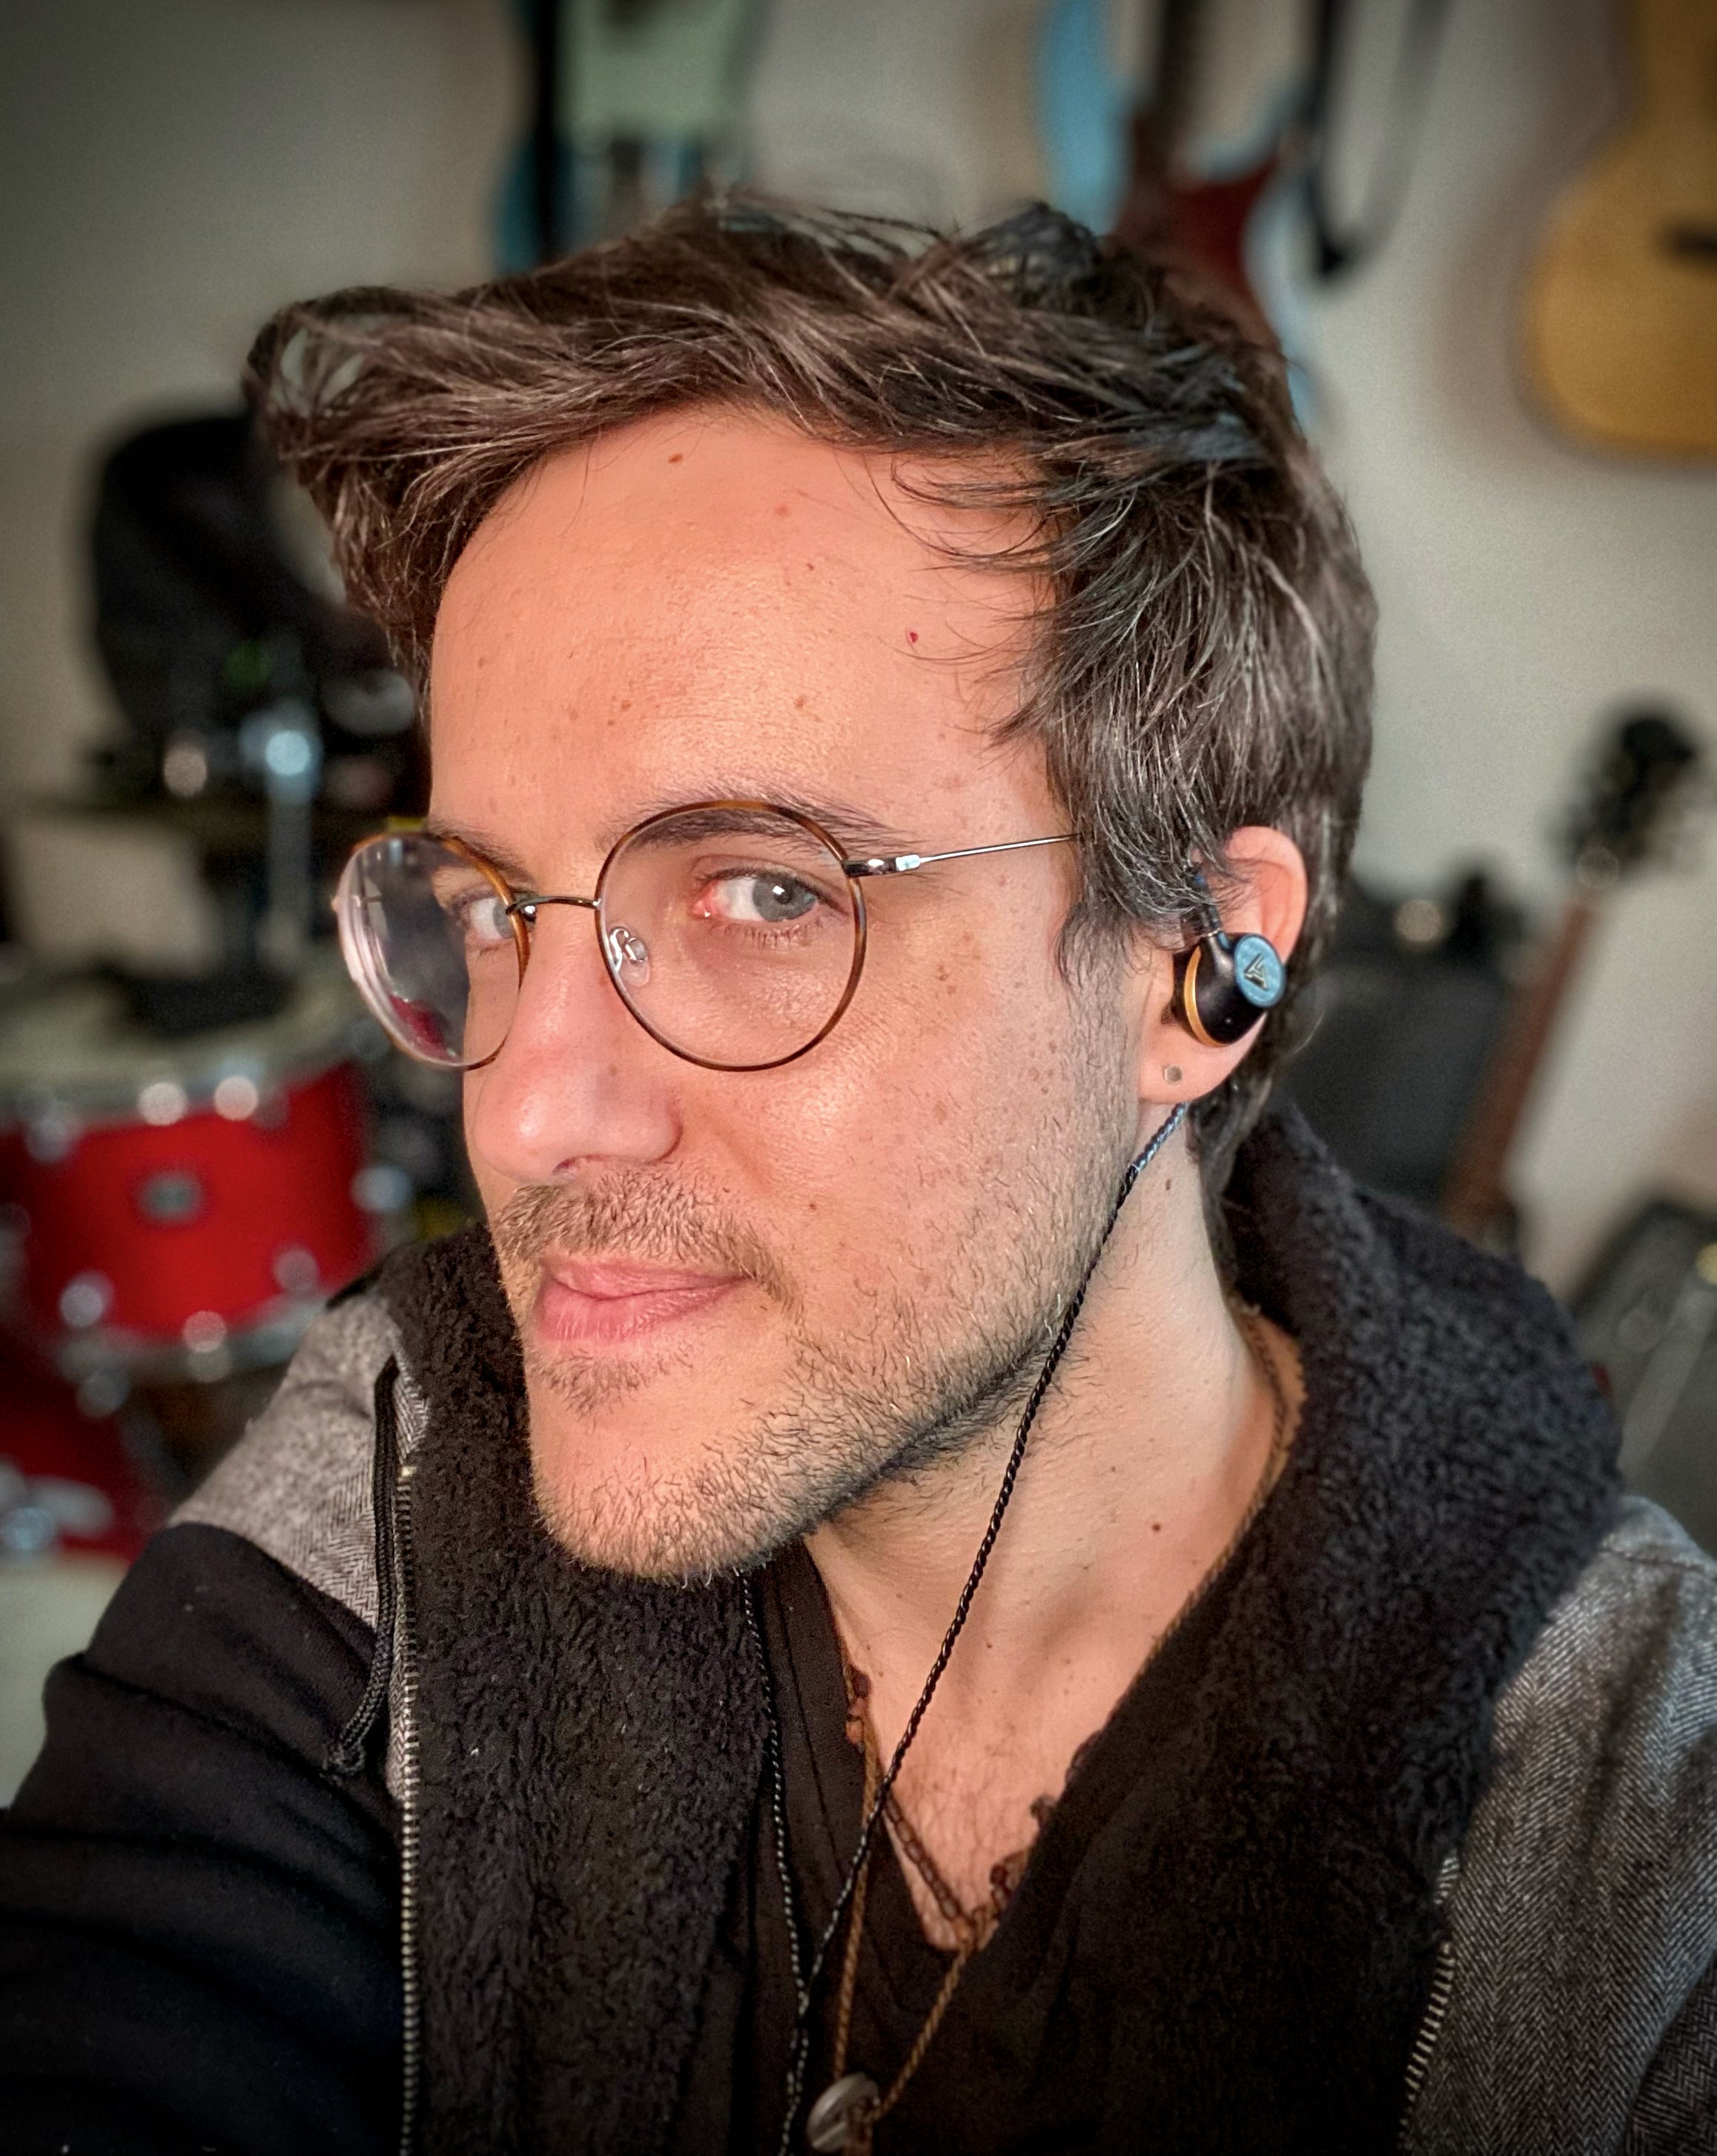 Composer Gilad Hekselman poses with his Audeze Euclid